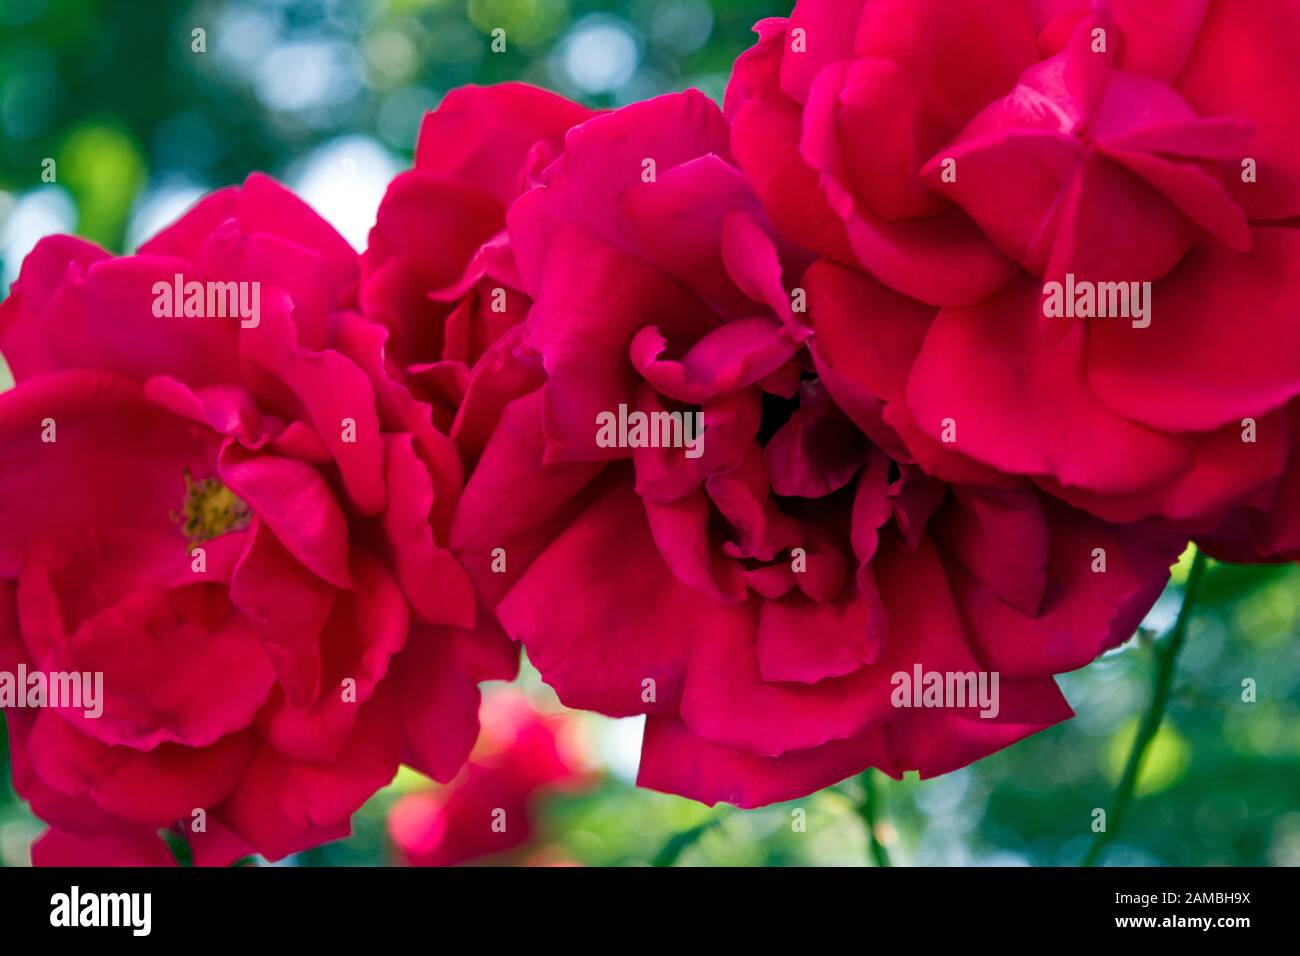 Three beautiful red garden roses. The red rose is the definitive symbol for romantic feelings and represents a true love. Close up photograph. Stock Photo